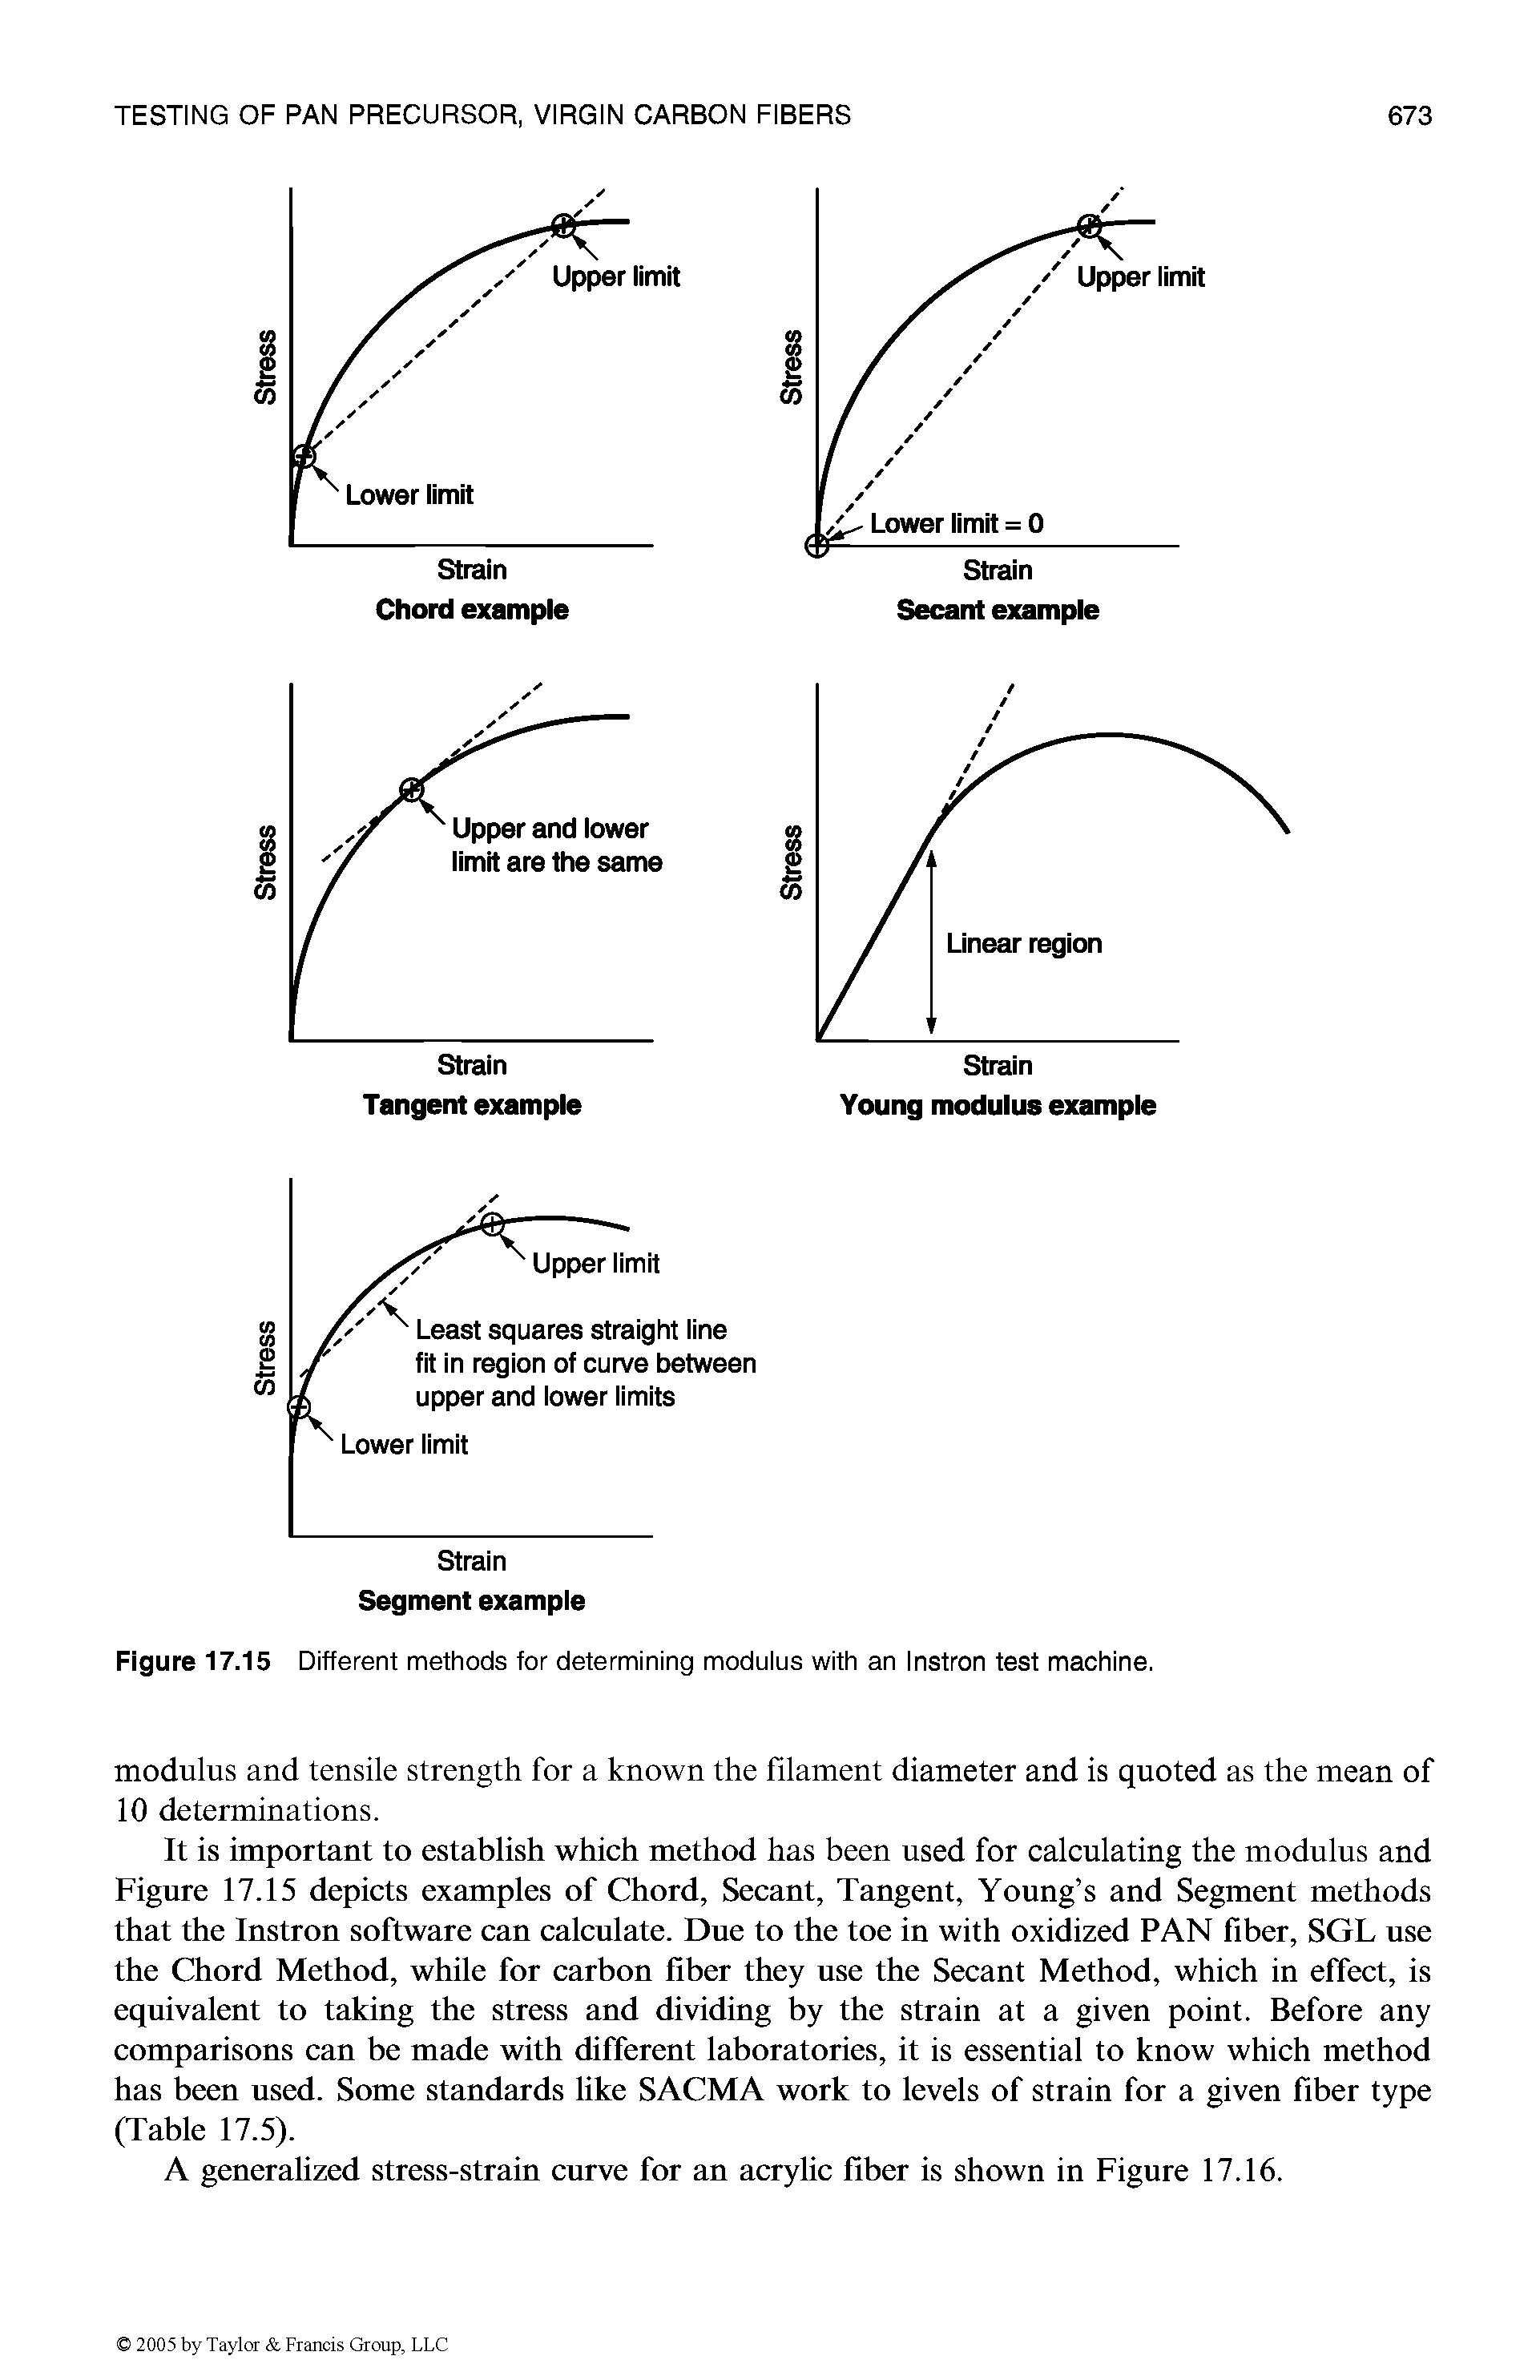 Figure 17.15 Different methods for determining modulus with an Instron test machine.